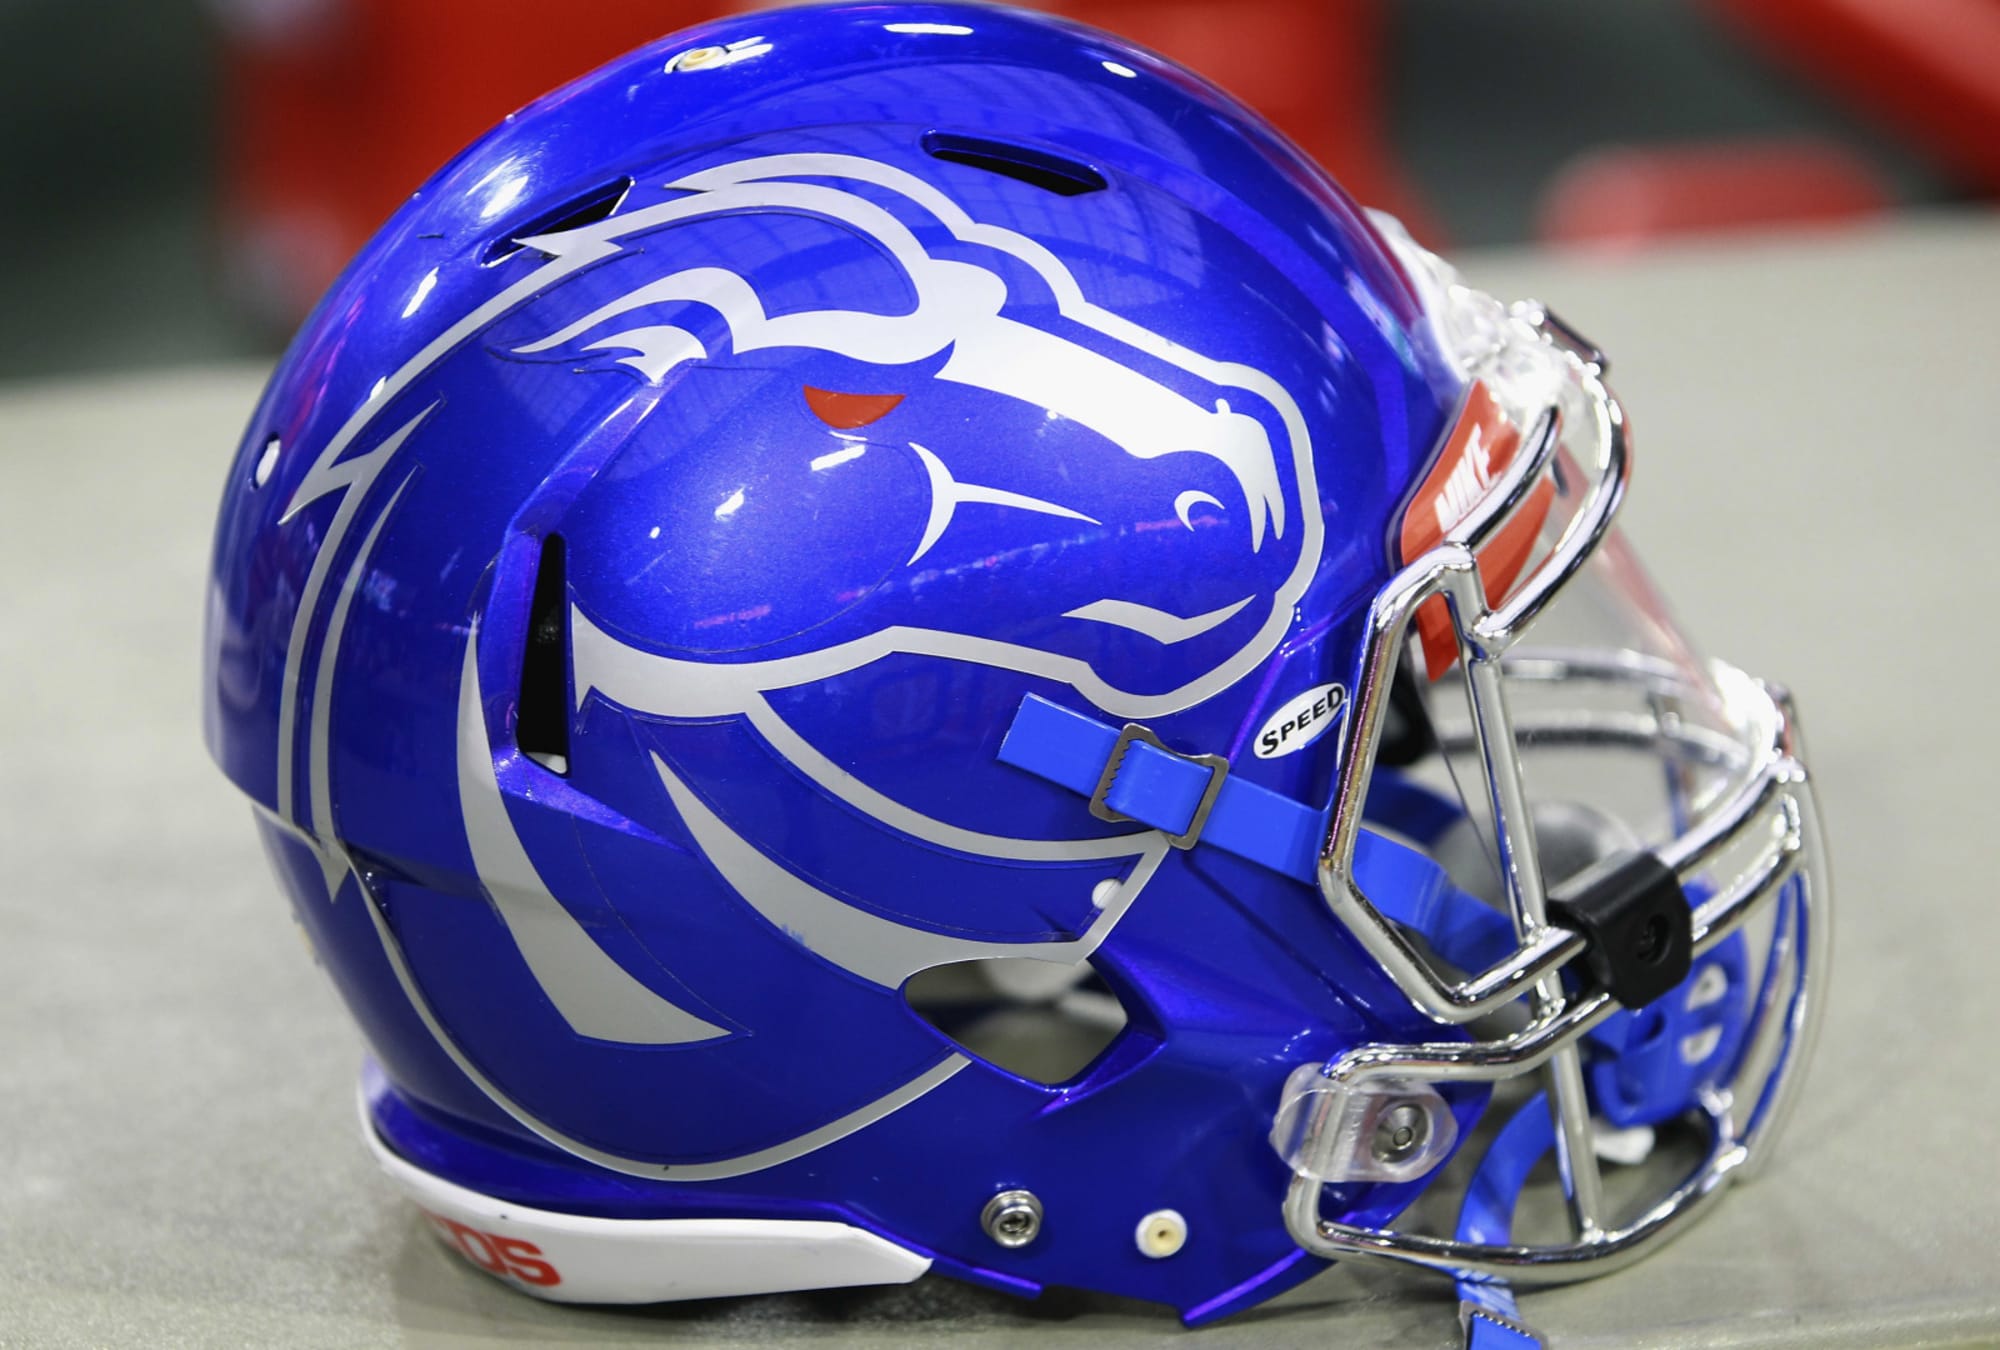 Boise State football continues march toward New Year's Six vs. Air Force